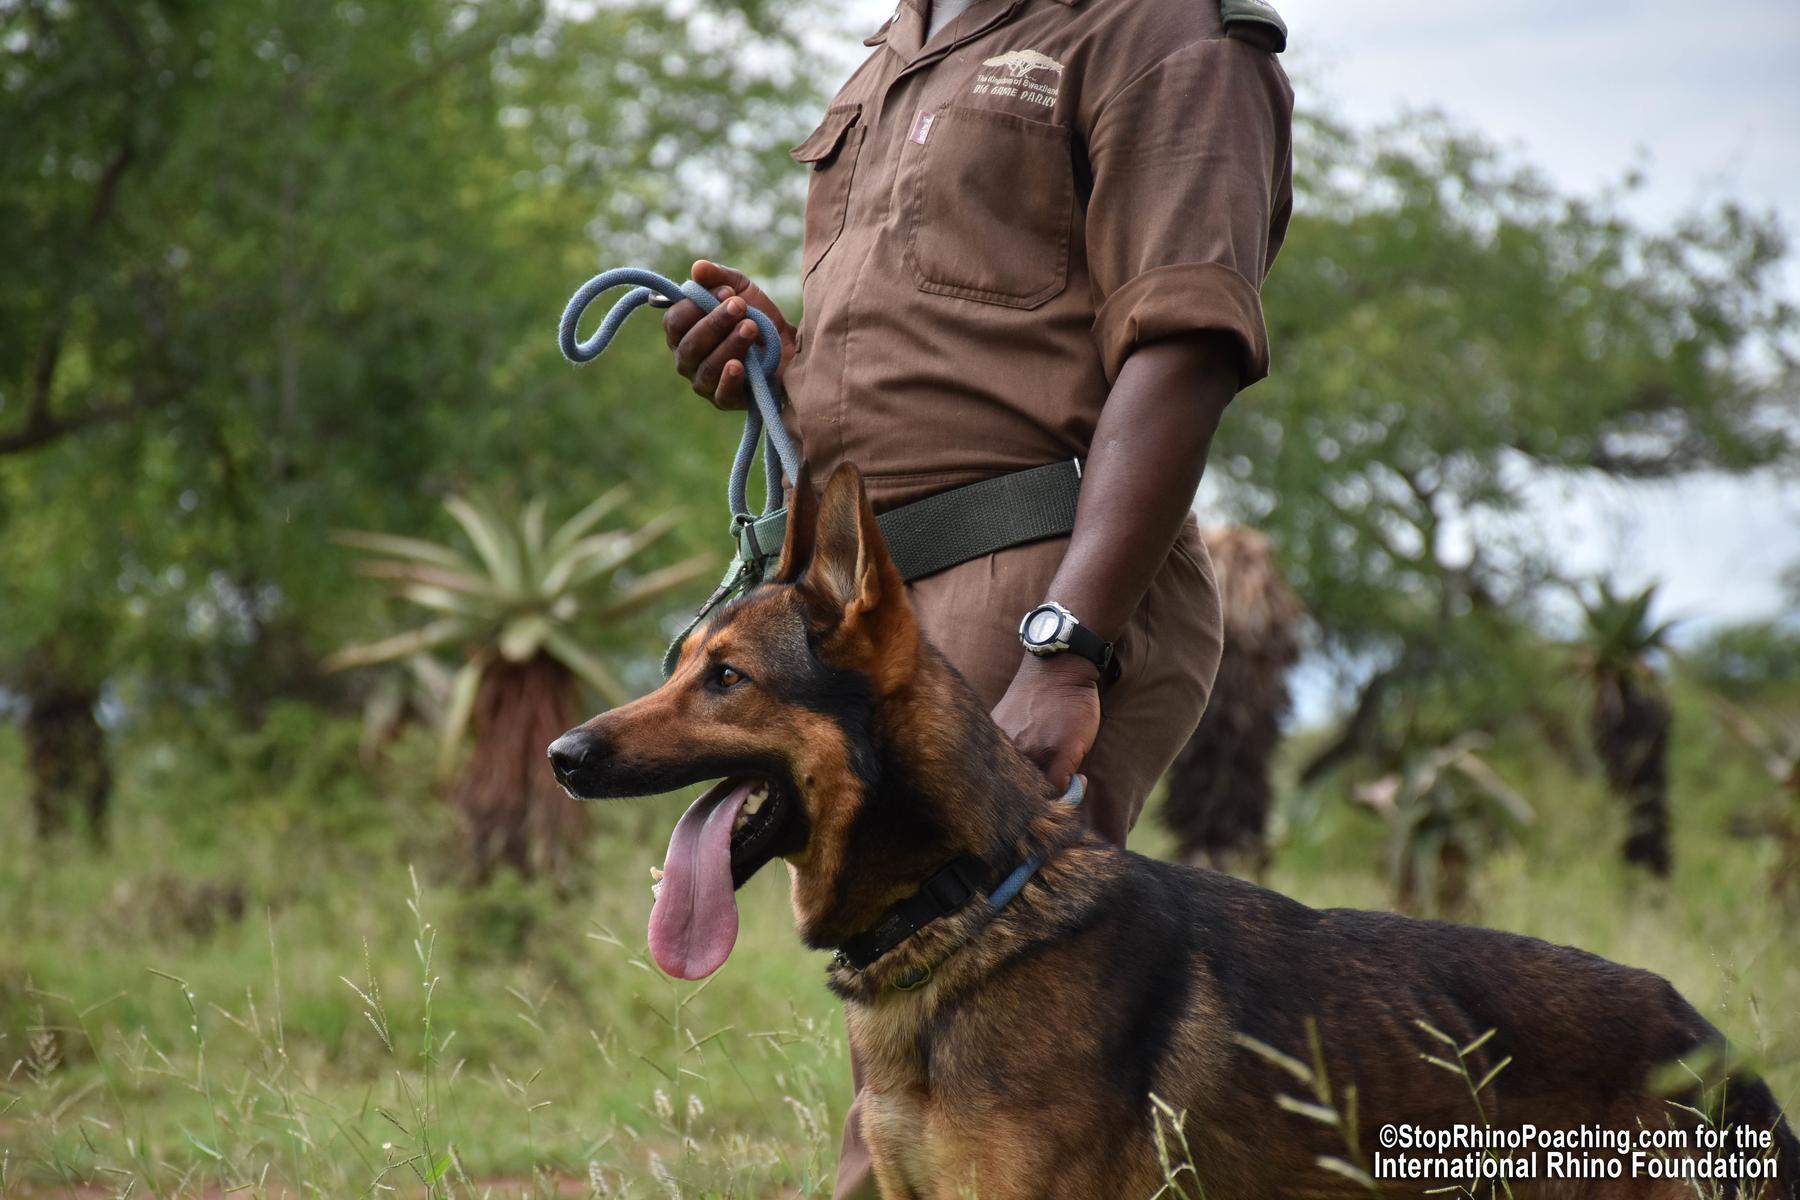 Meet Dozer – A New Soldier in Fight to Save Rhinos from Poachers